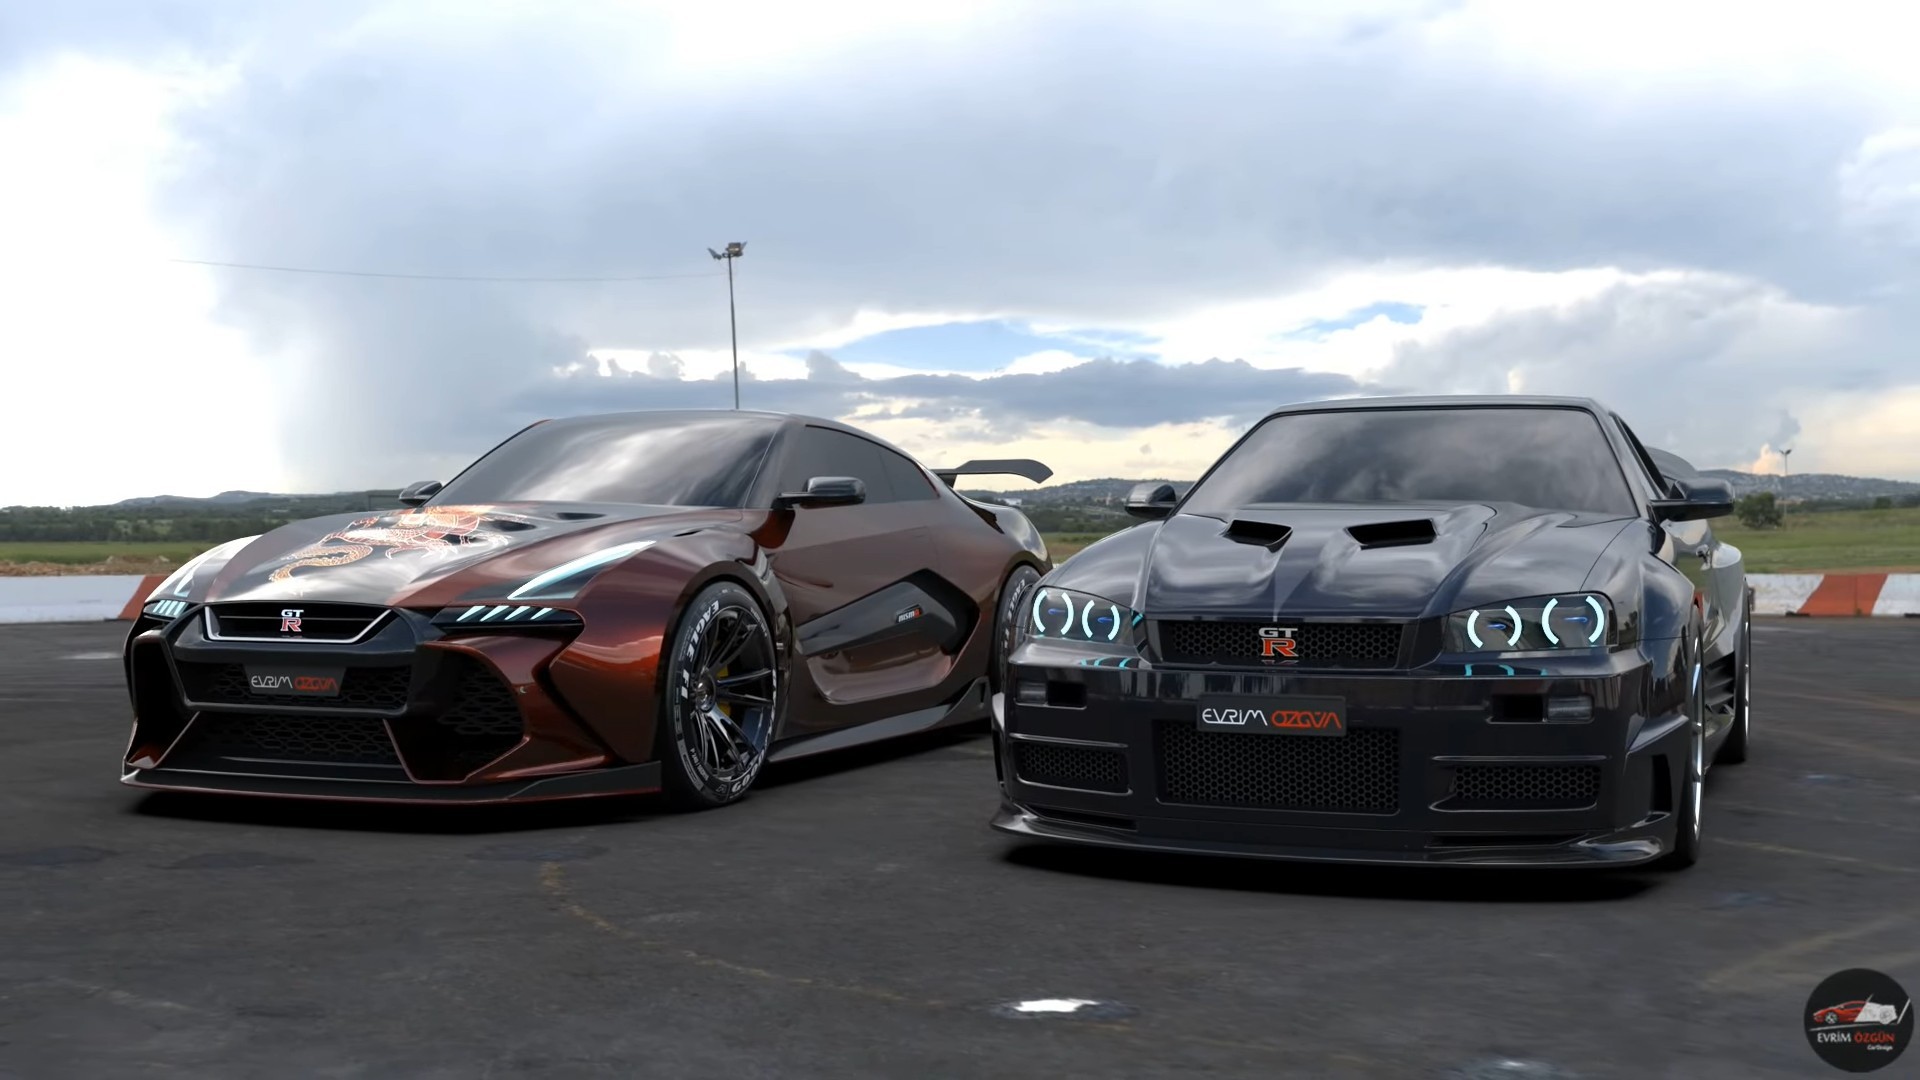 Iconic R34 Skyline GT-R Meets All-New R36 Nissan GT-R Heir - In a